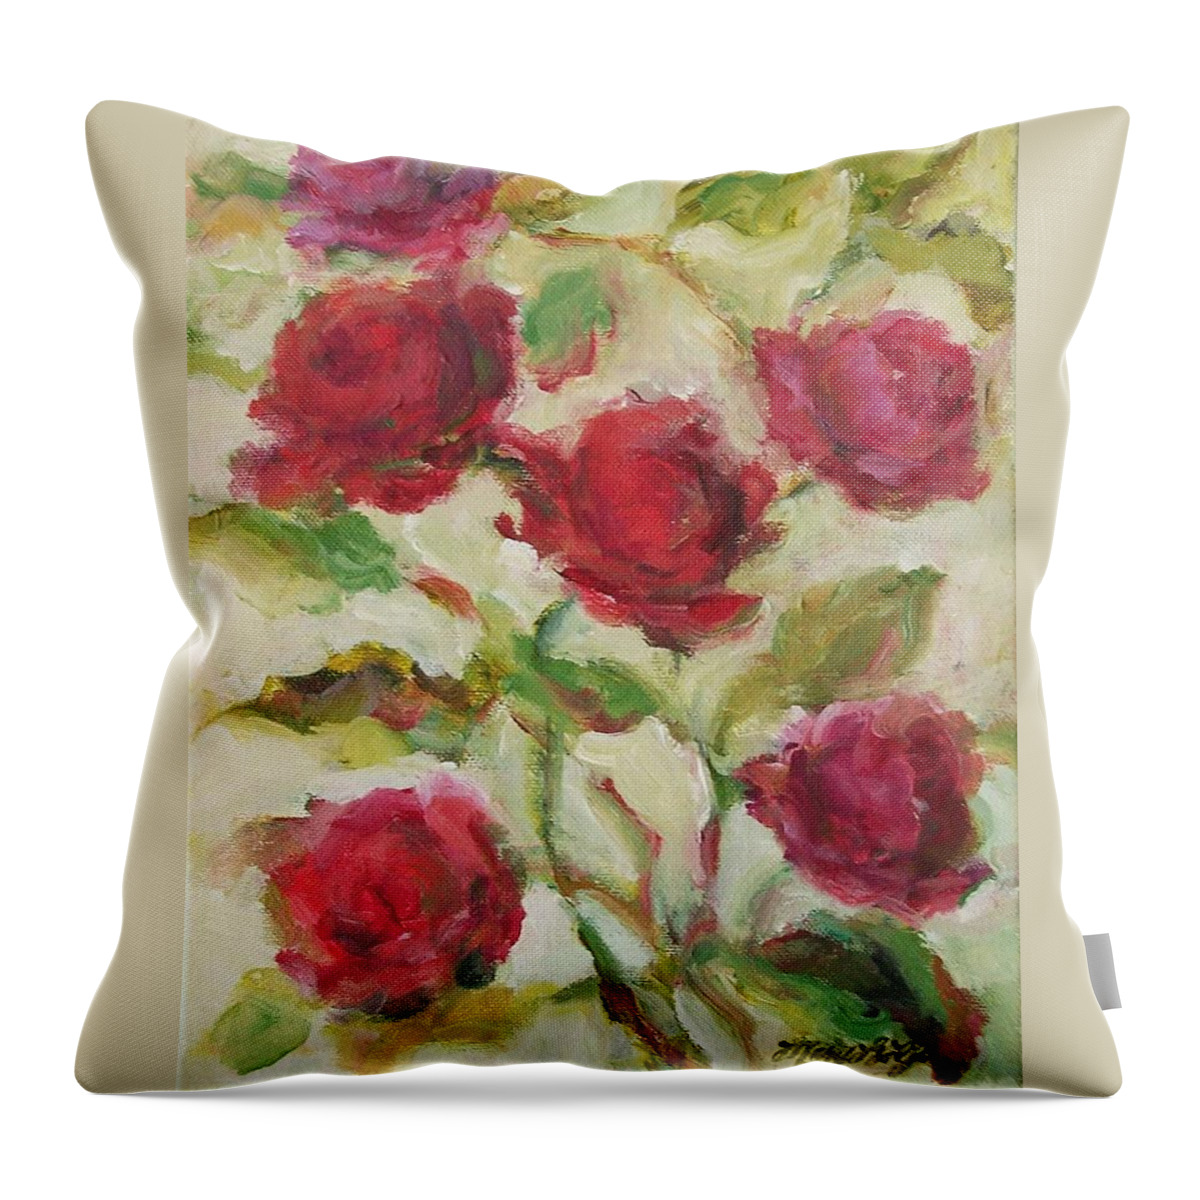 Impressionism Throw Pillow featuring the painting Roses by Mary Wolf